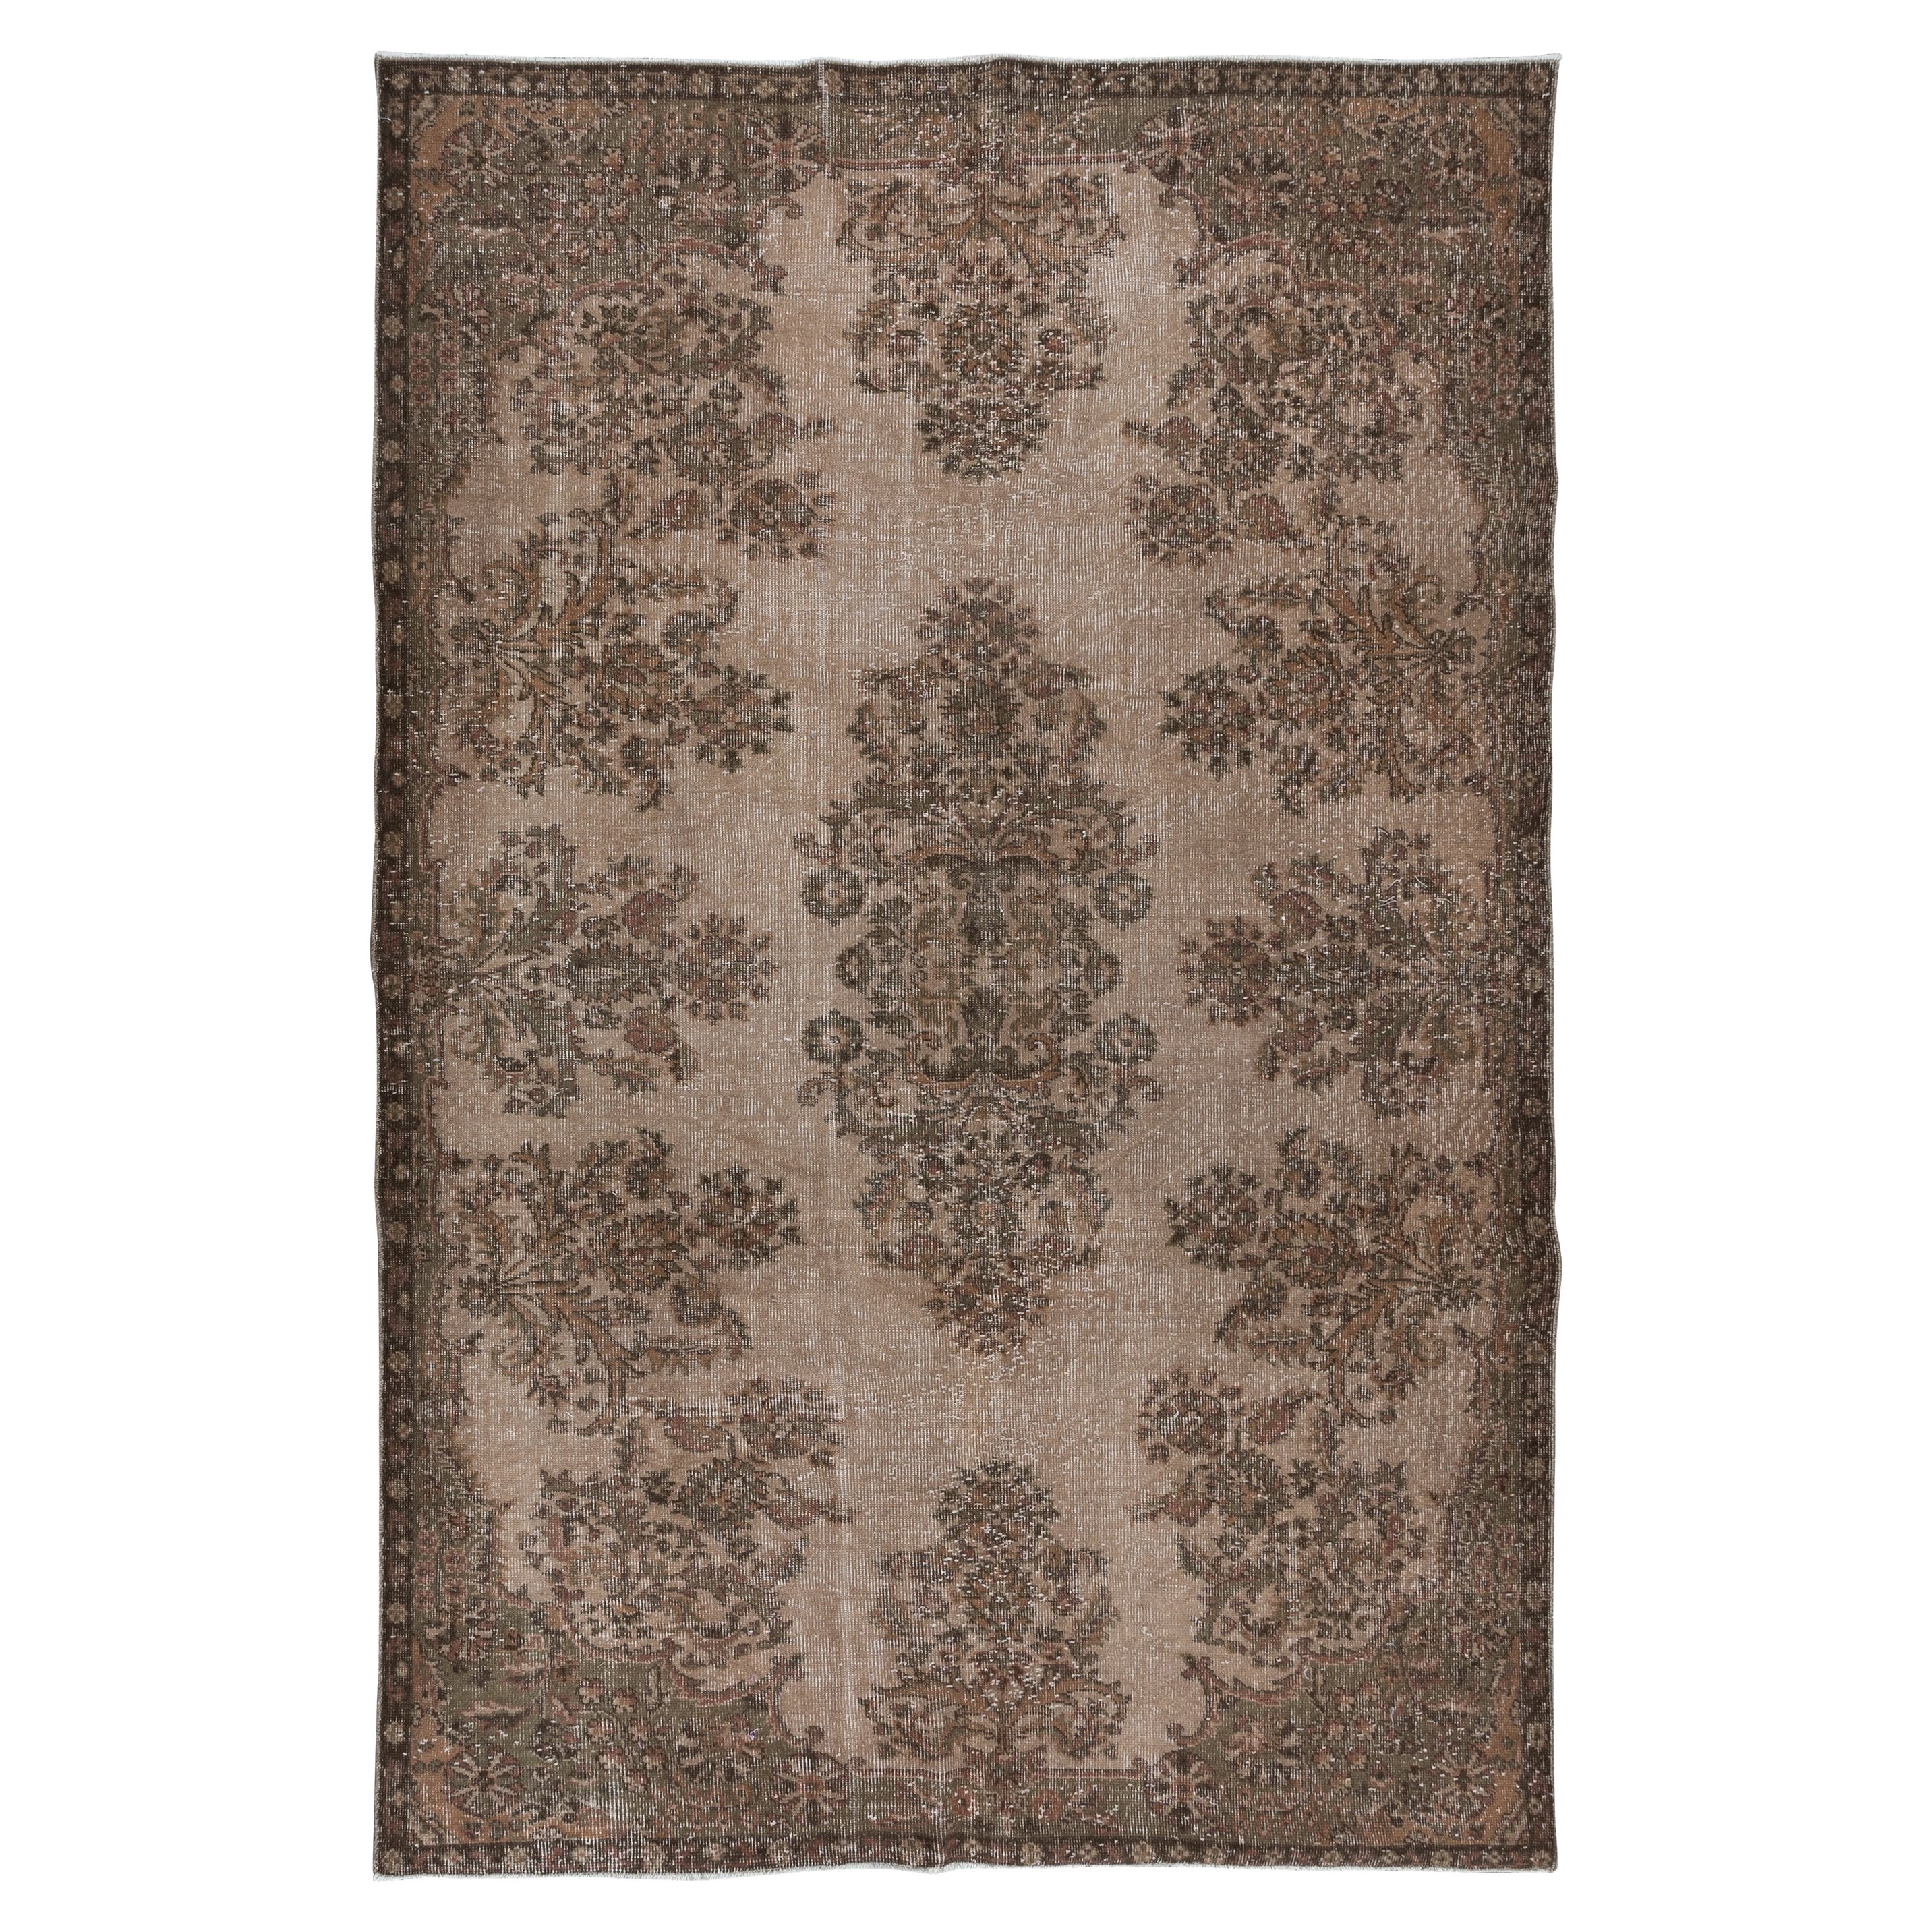 6.3x9.4 Ft Brown Handmade Area Rug with Garden Design, Entryway & Kitchen Carpet For Sale